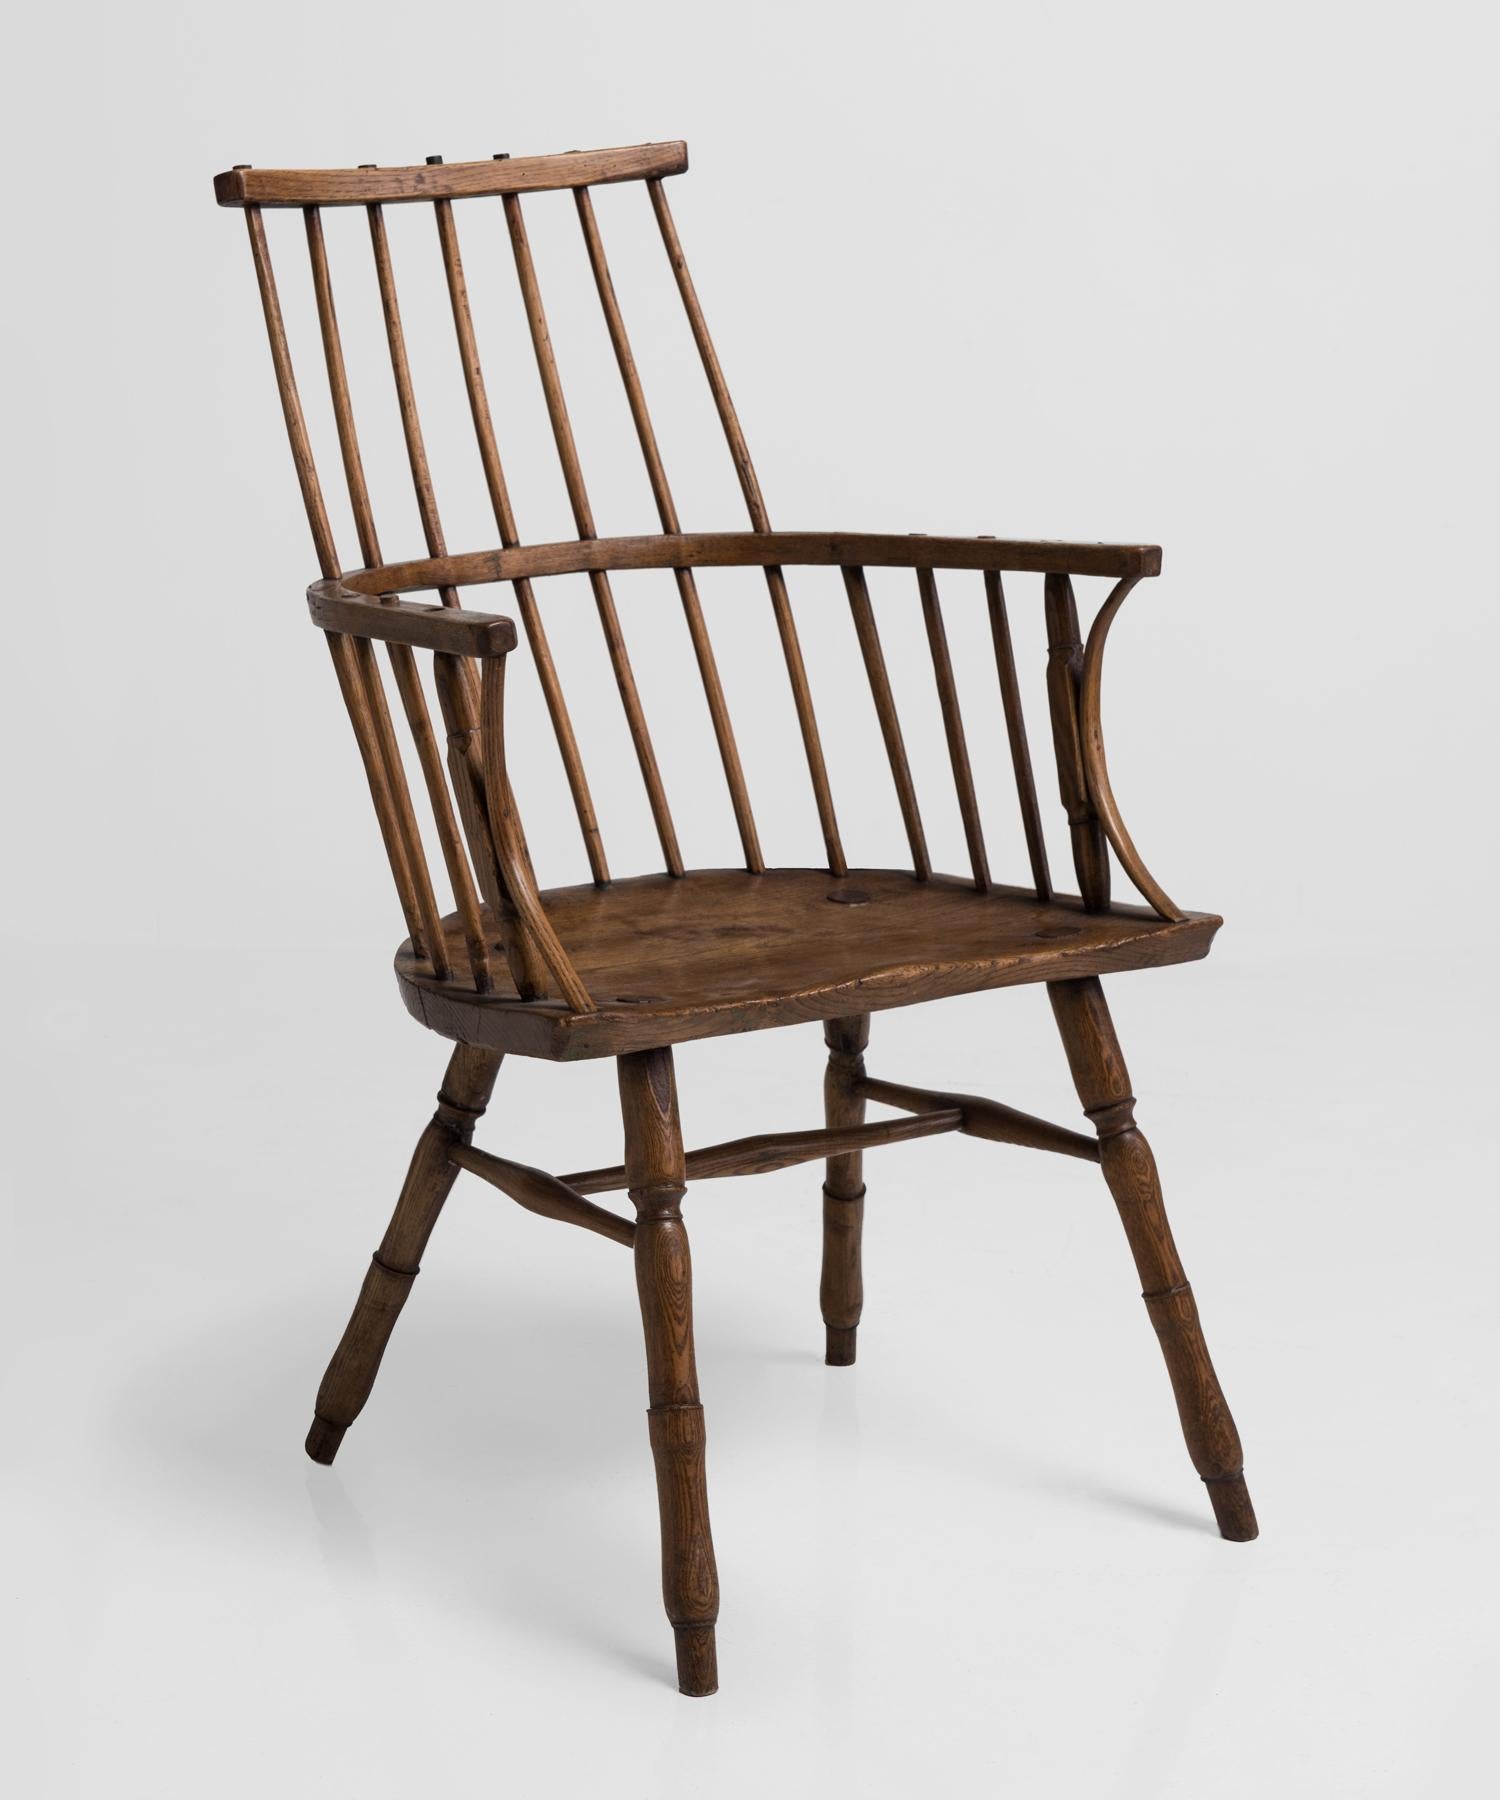 Primitive ash stick chair, England, 18th century.

Handcrafted Windsor chair with slab seat.